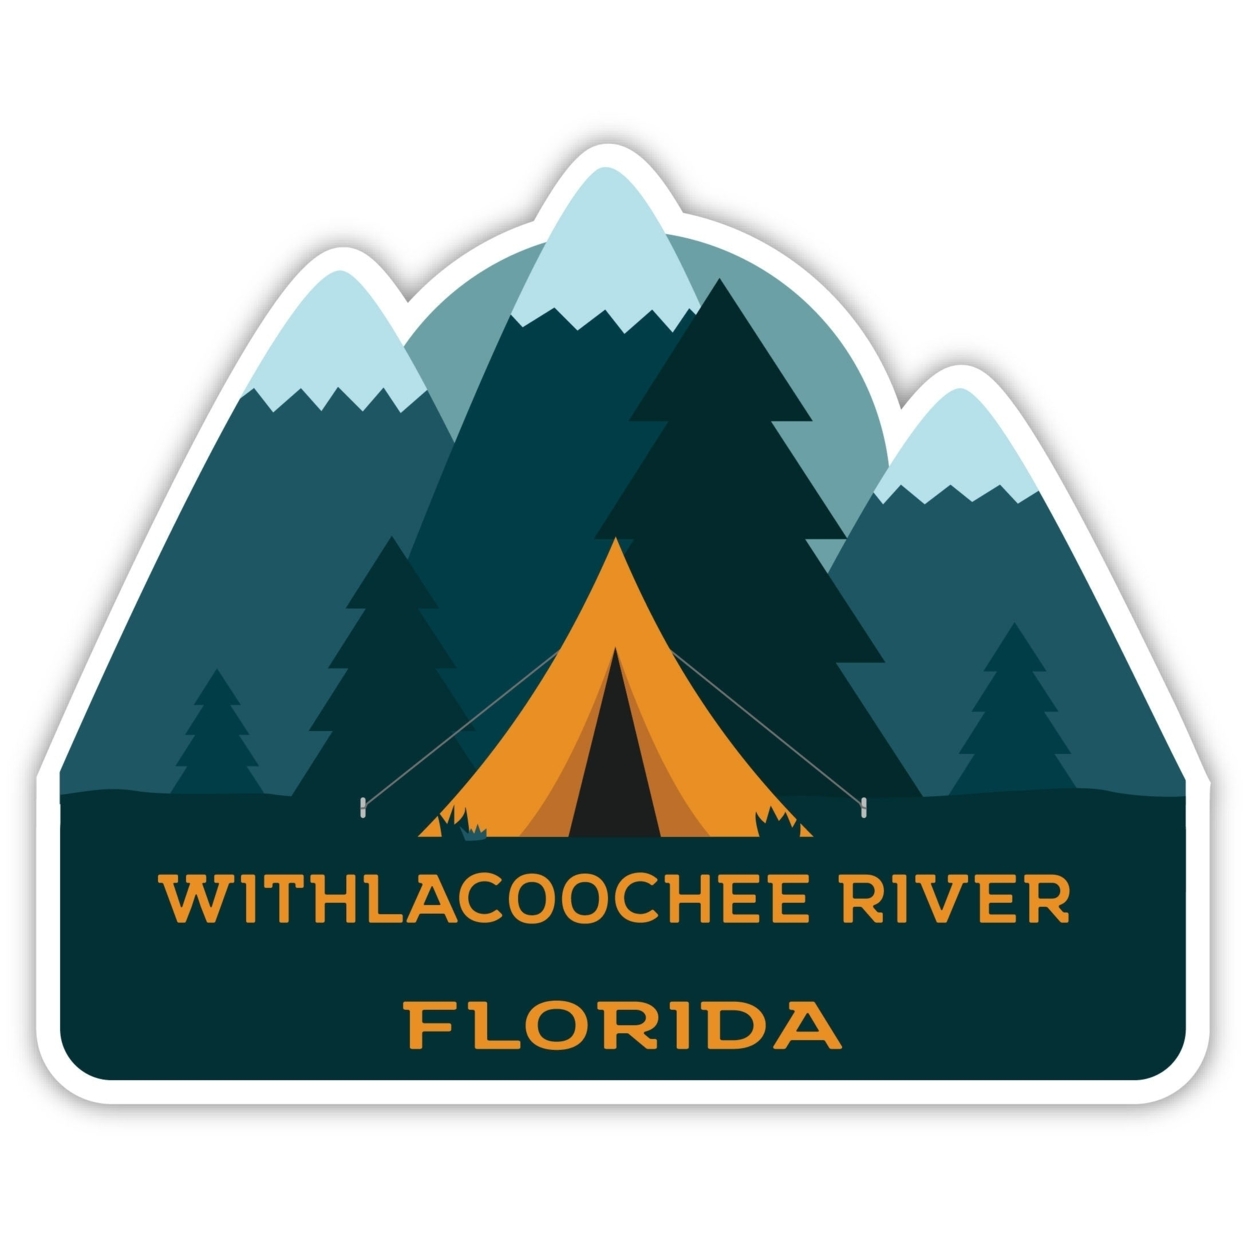 Withlacoochee River Florida Souvenir Decorative Stickers (Choose Theme And Size) - Single Unit, 2-Inch, Camp Life